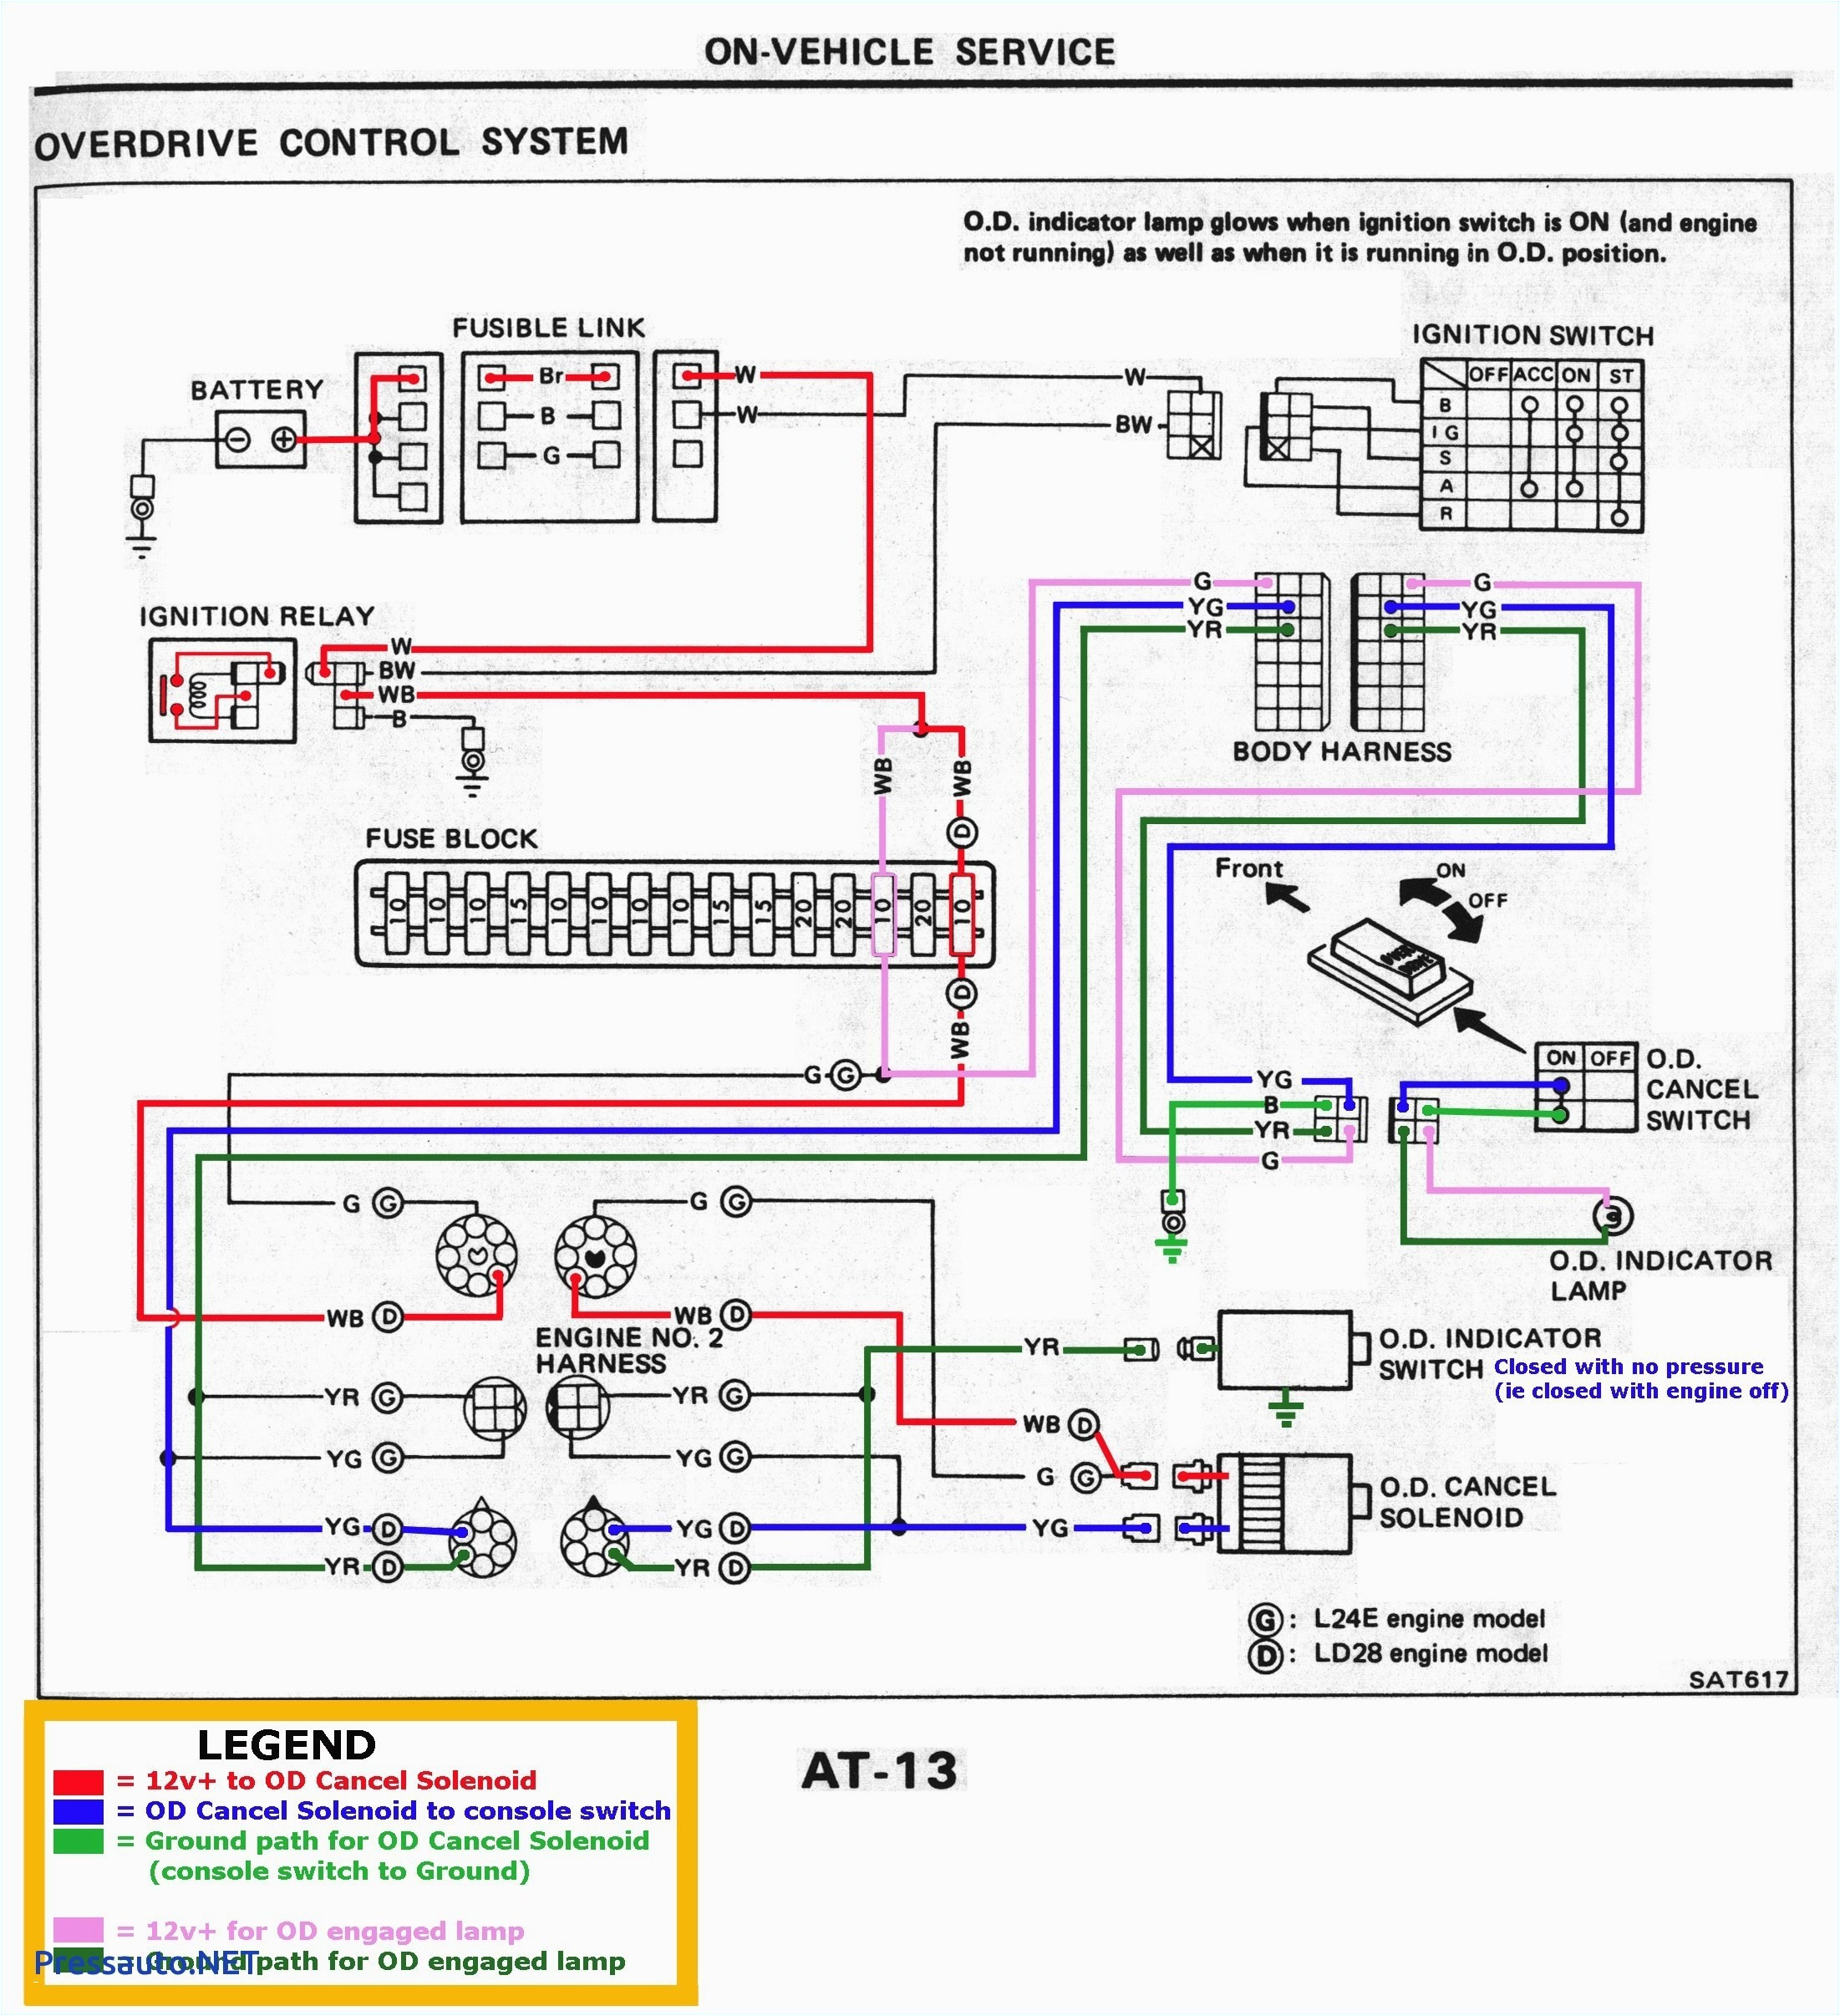 payphone wiring diagram luxury acd air shifter wiring diagram trusted schematic diagrams